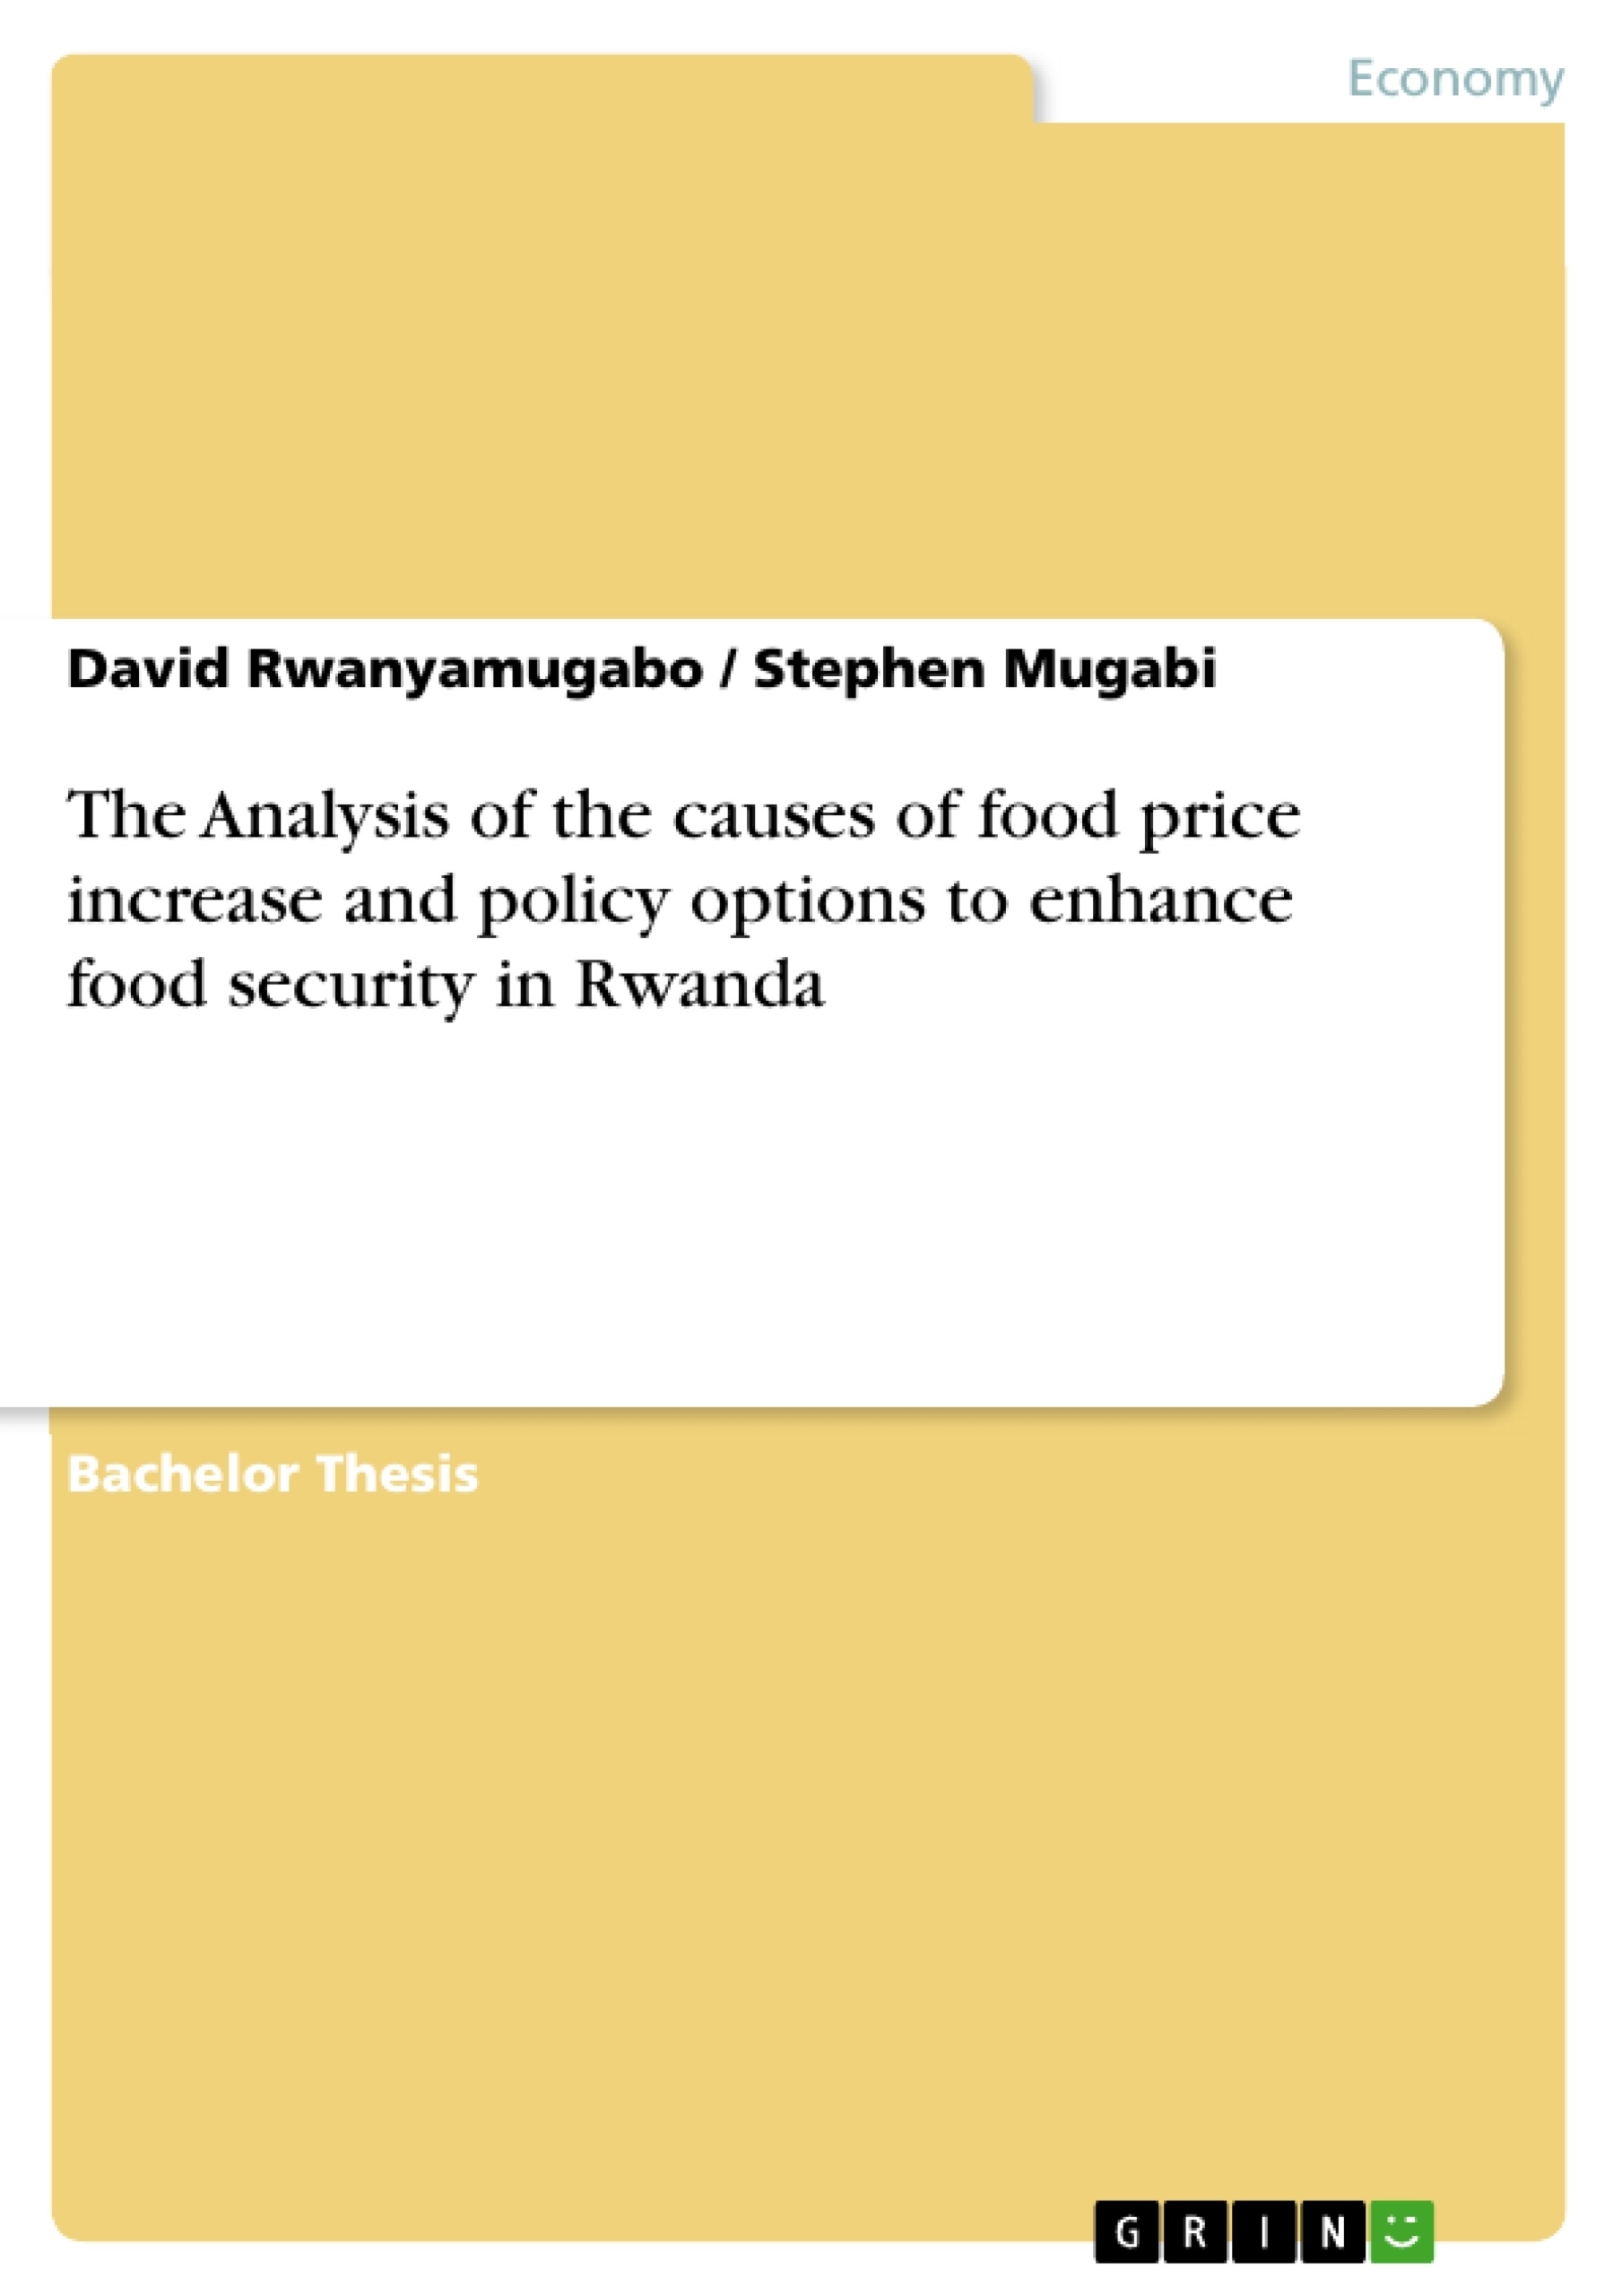 Titre: The Analysis of the causes of food price increase and policy options to enhance food security in Rwanda